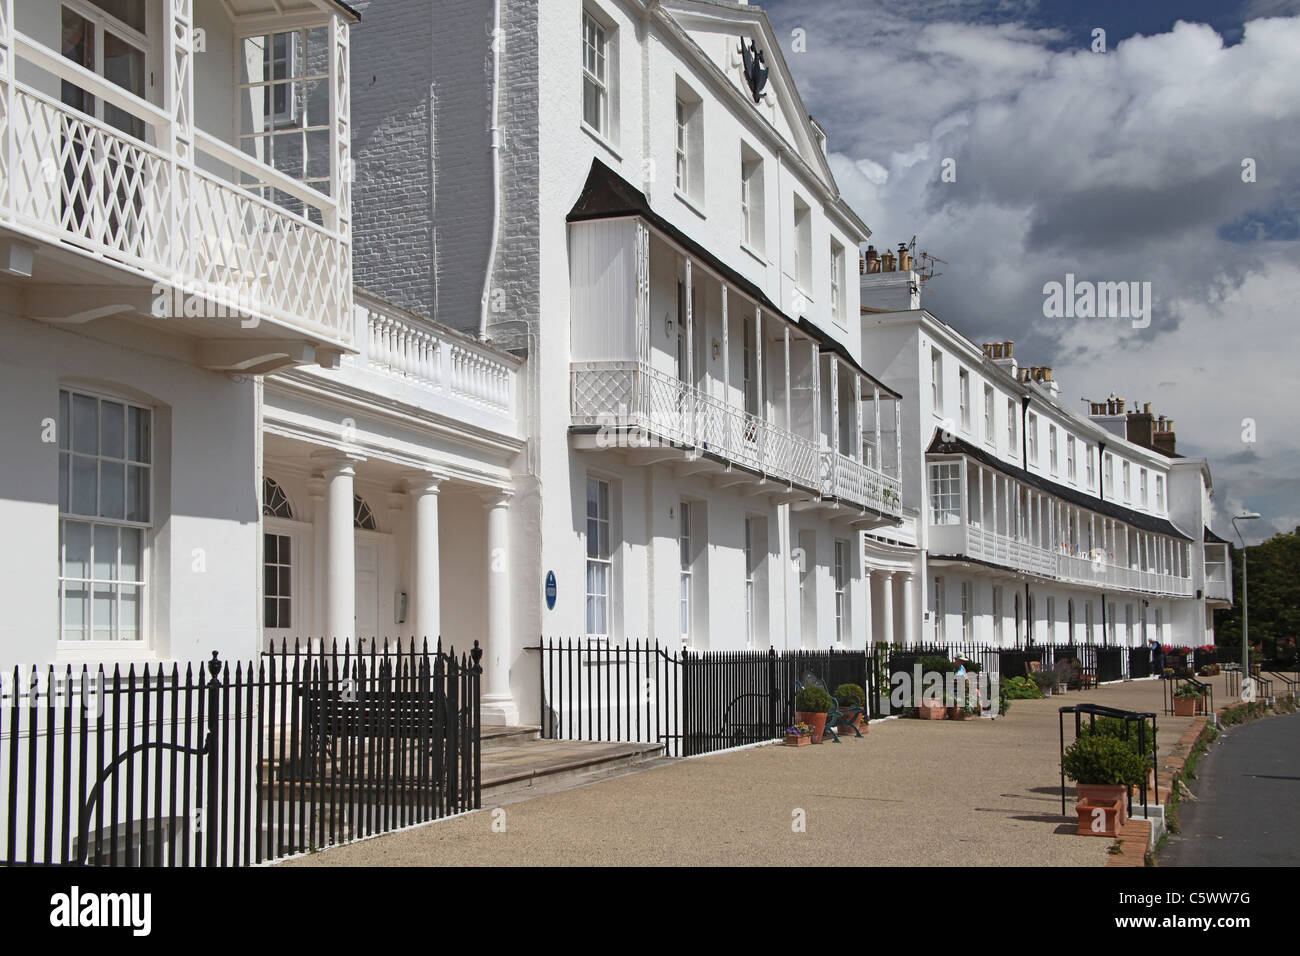 The elegant white Regency architecture of Fortfield Terrace in Sidmouth, Devon, England, UK Stock Photo